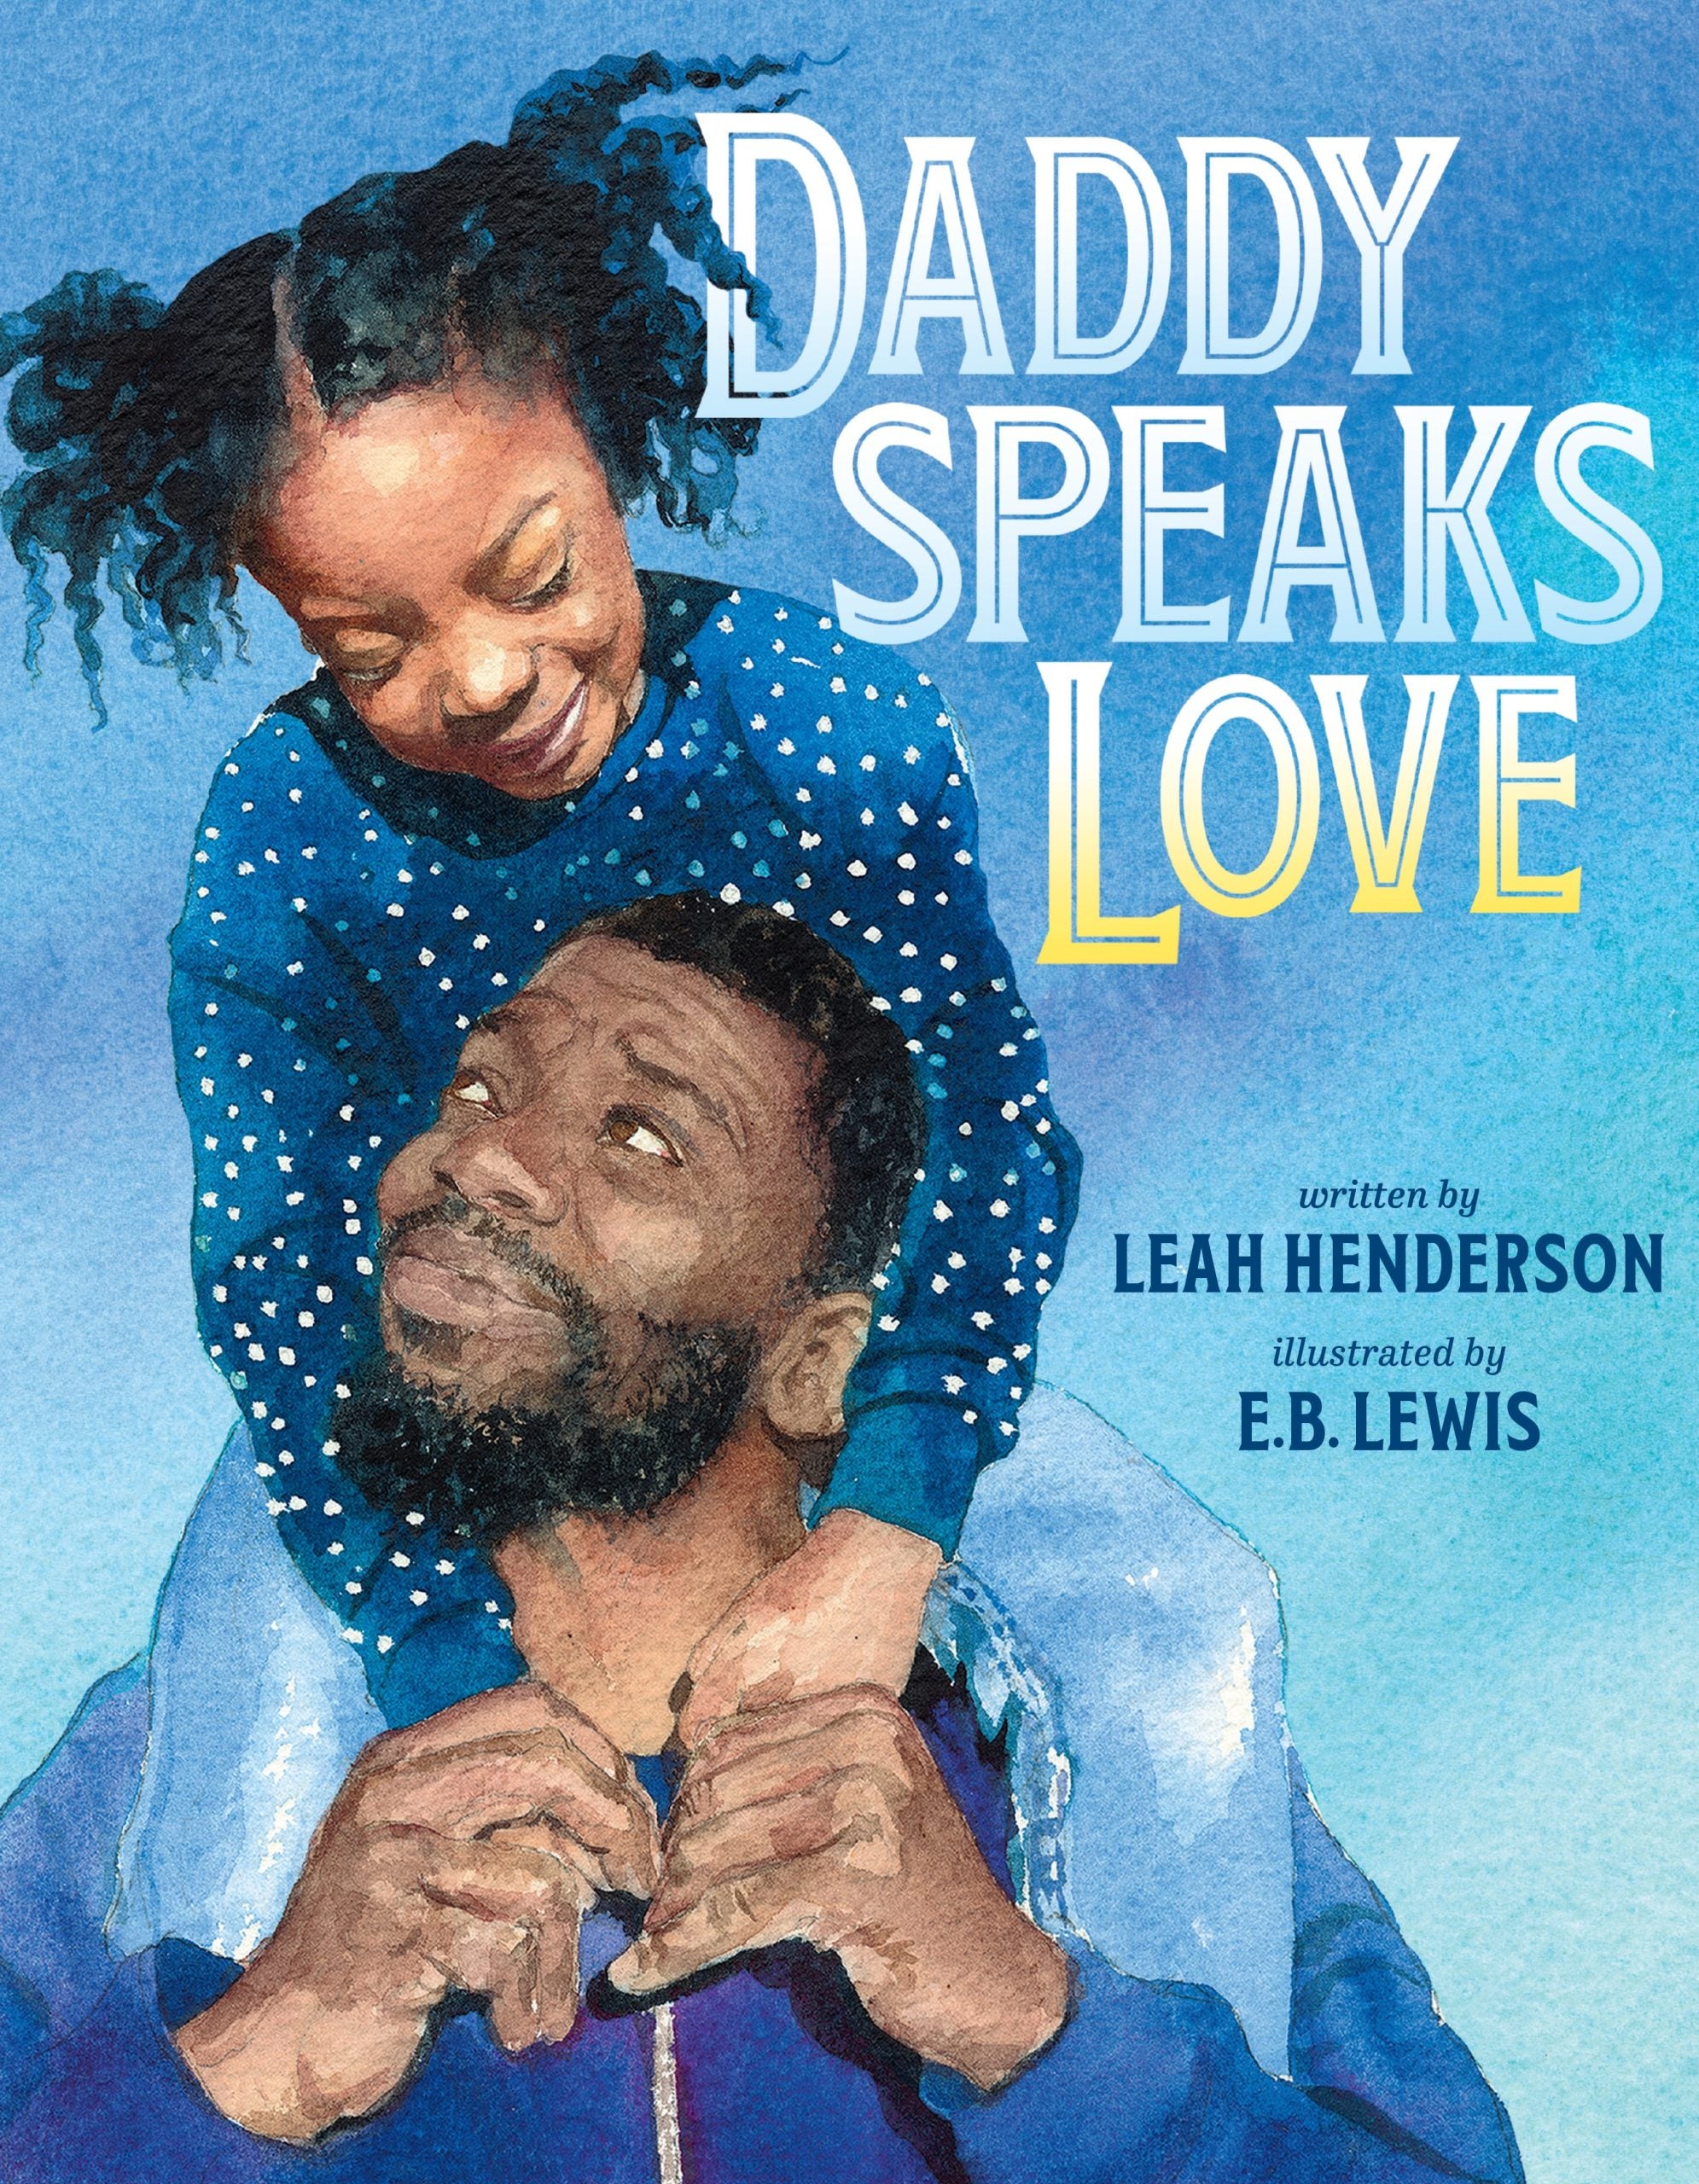 Inspired By George Floyd And Daughter Gianna, ‘Daddy Speaks Love’ Is A Tribute To The Bond Between Father And Child